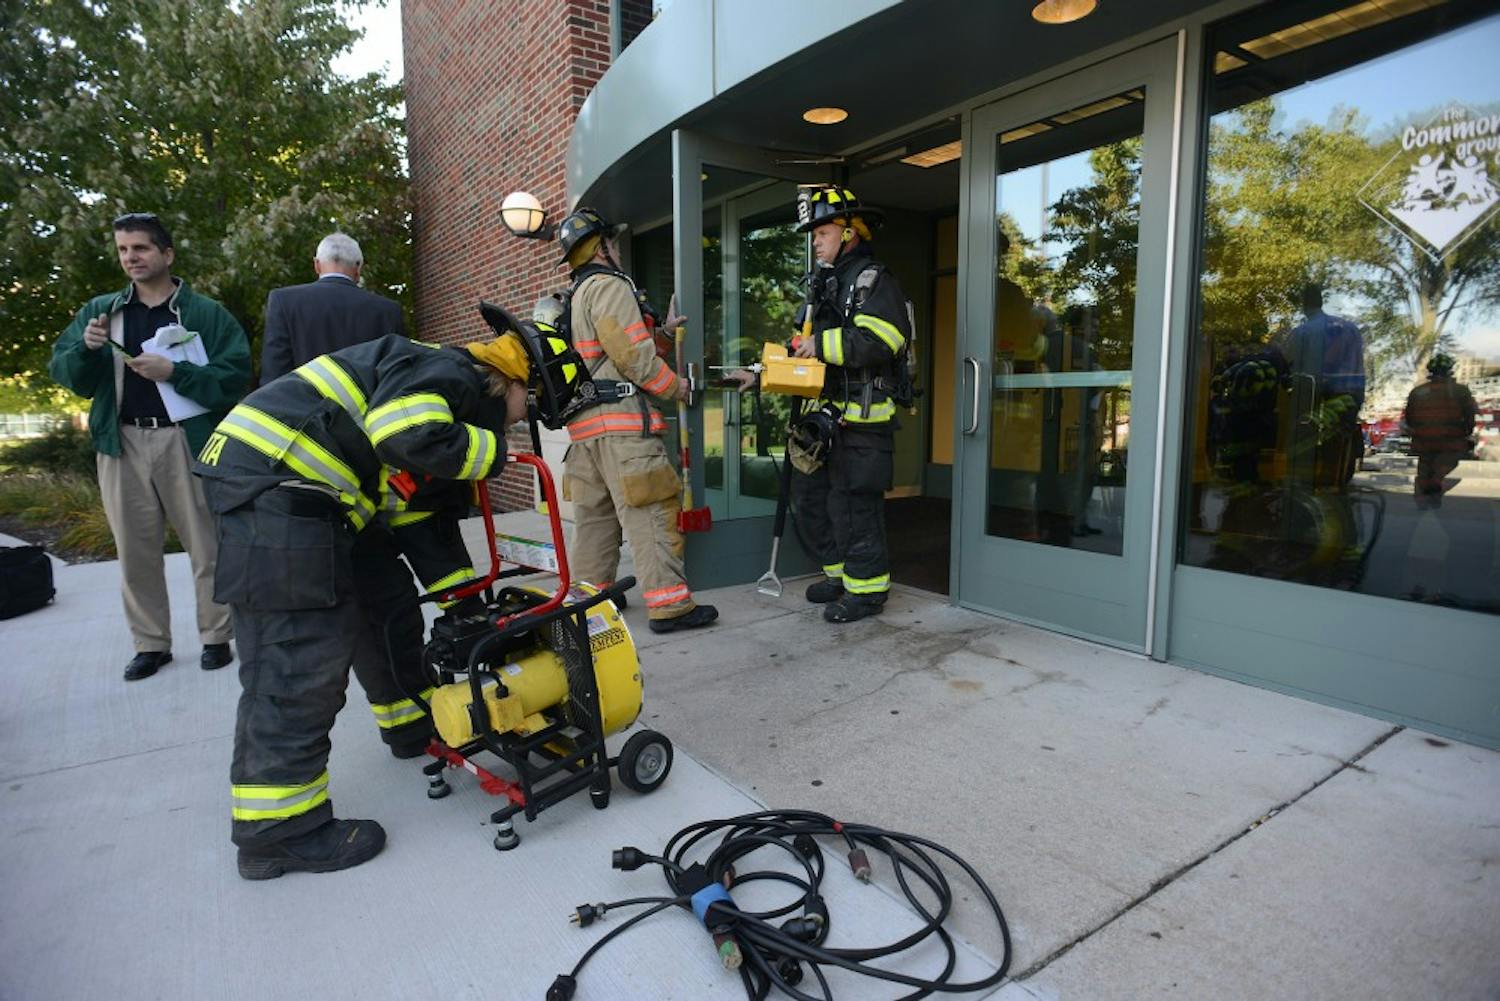 The Ypsilanti Fire Department working to remedy the generator malfunction at Marshall Building Wednesday morning.